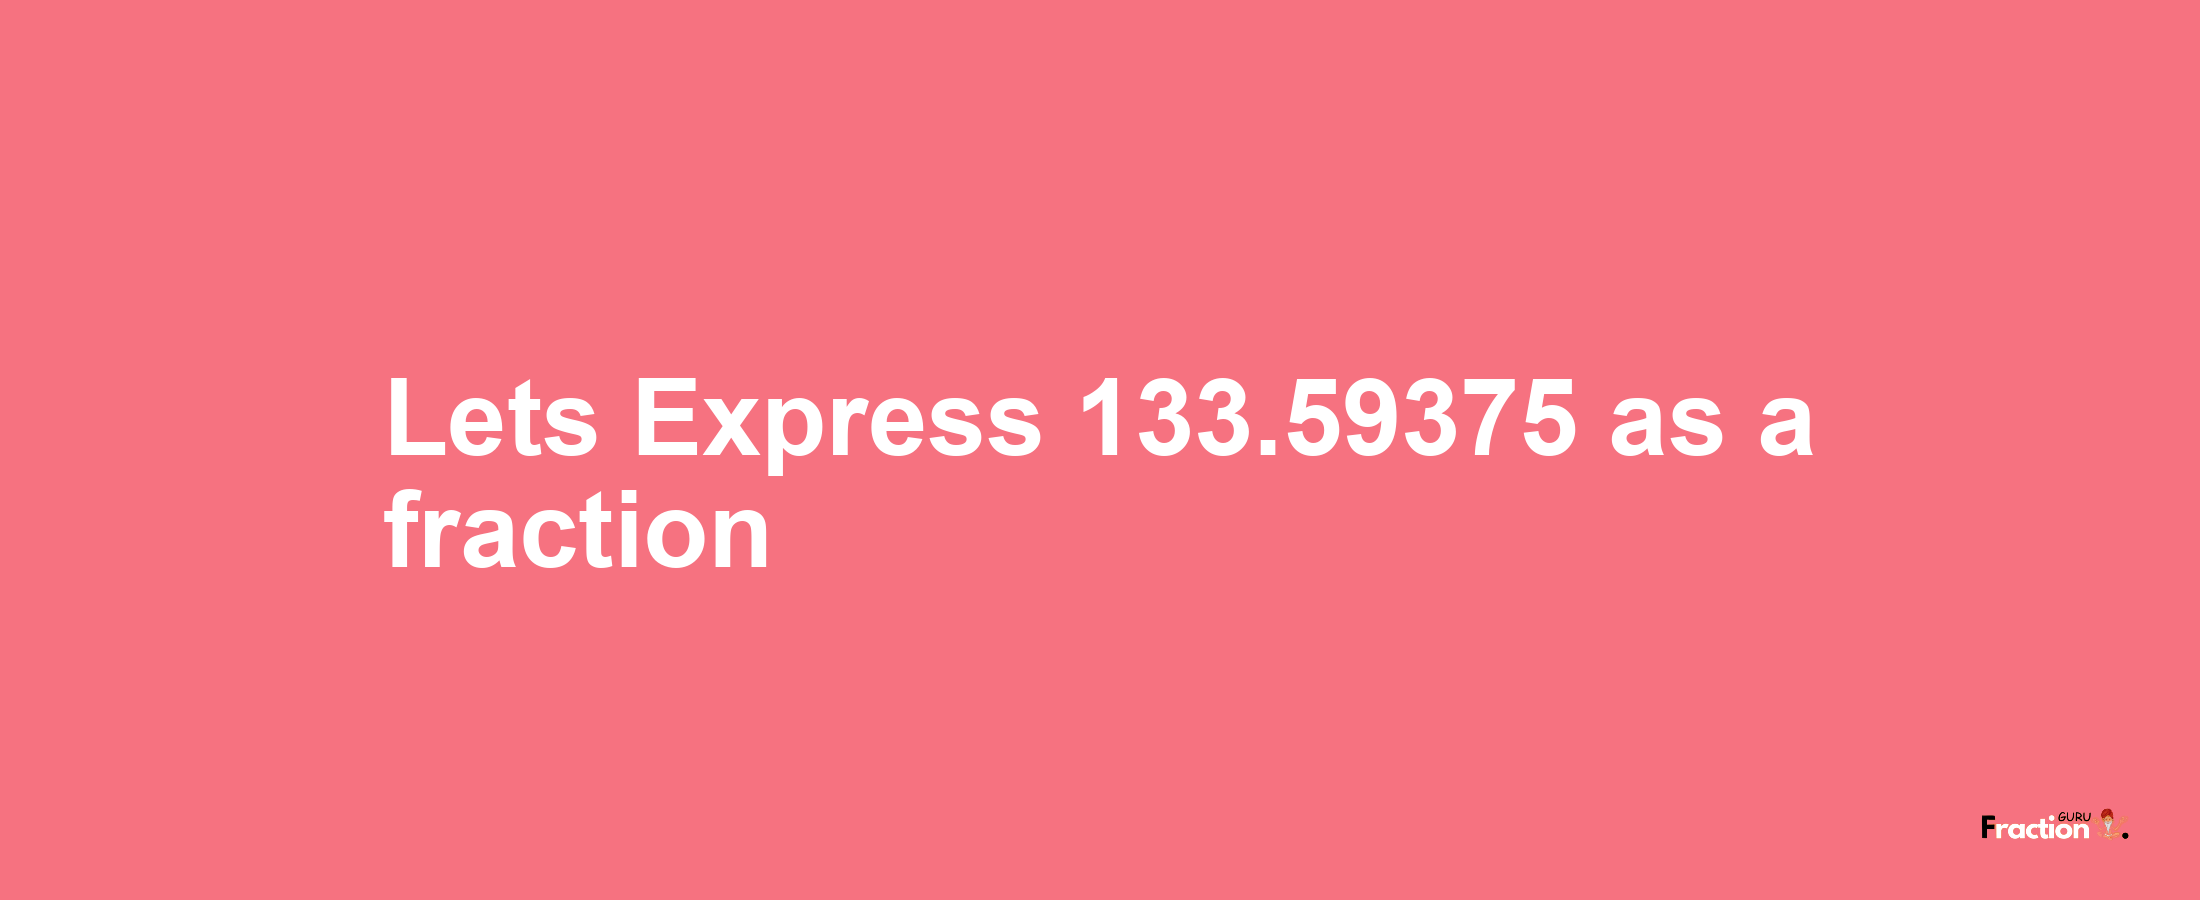 Lets Express 133.59375 as afraction